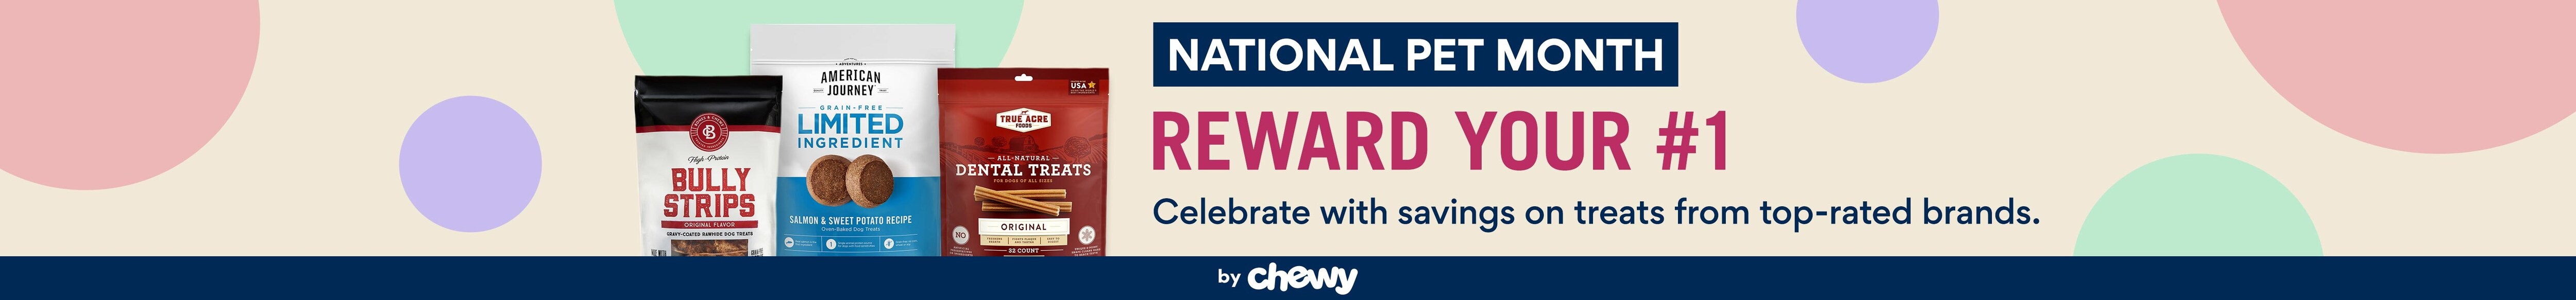 National Pet Month. Reward Your #1. Celebrate with savings on treats from top-rated brands by Chewy.